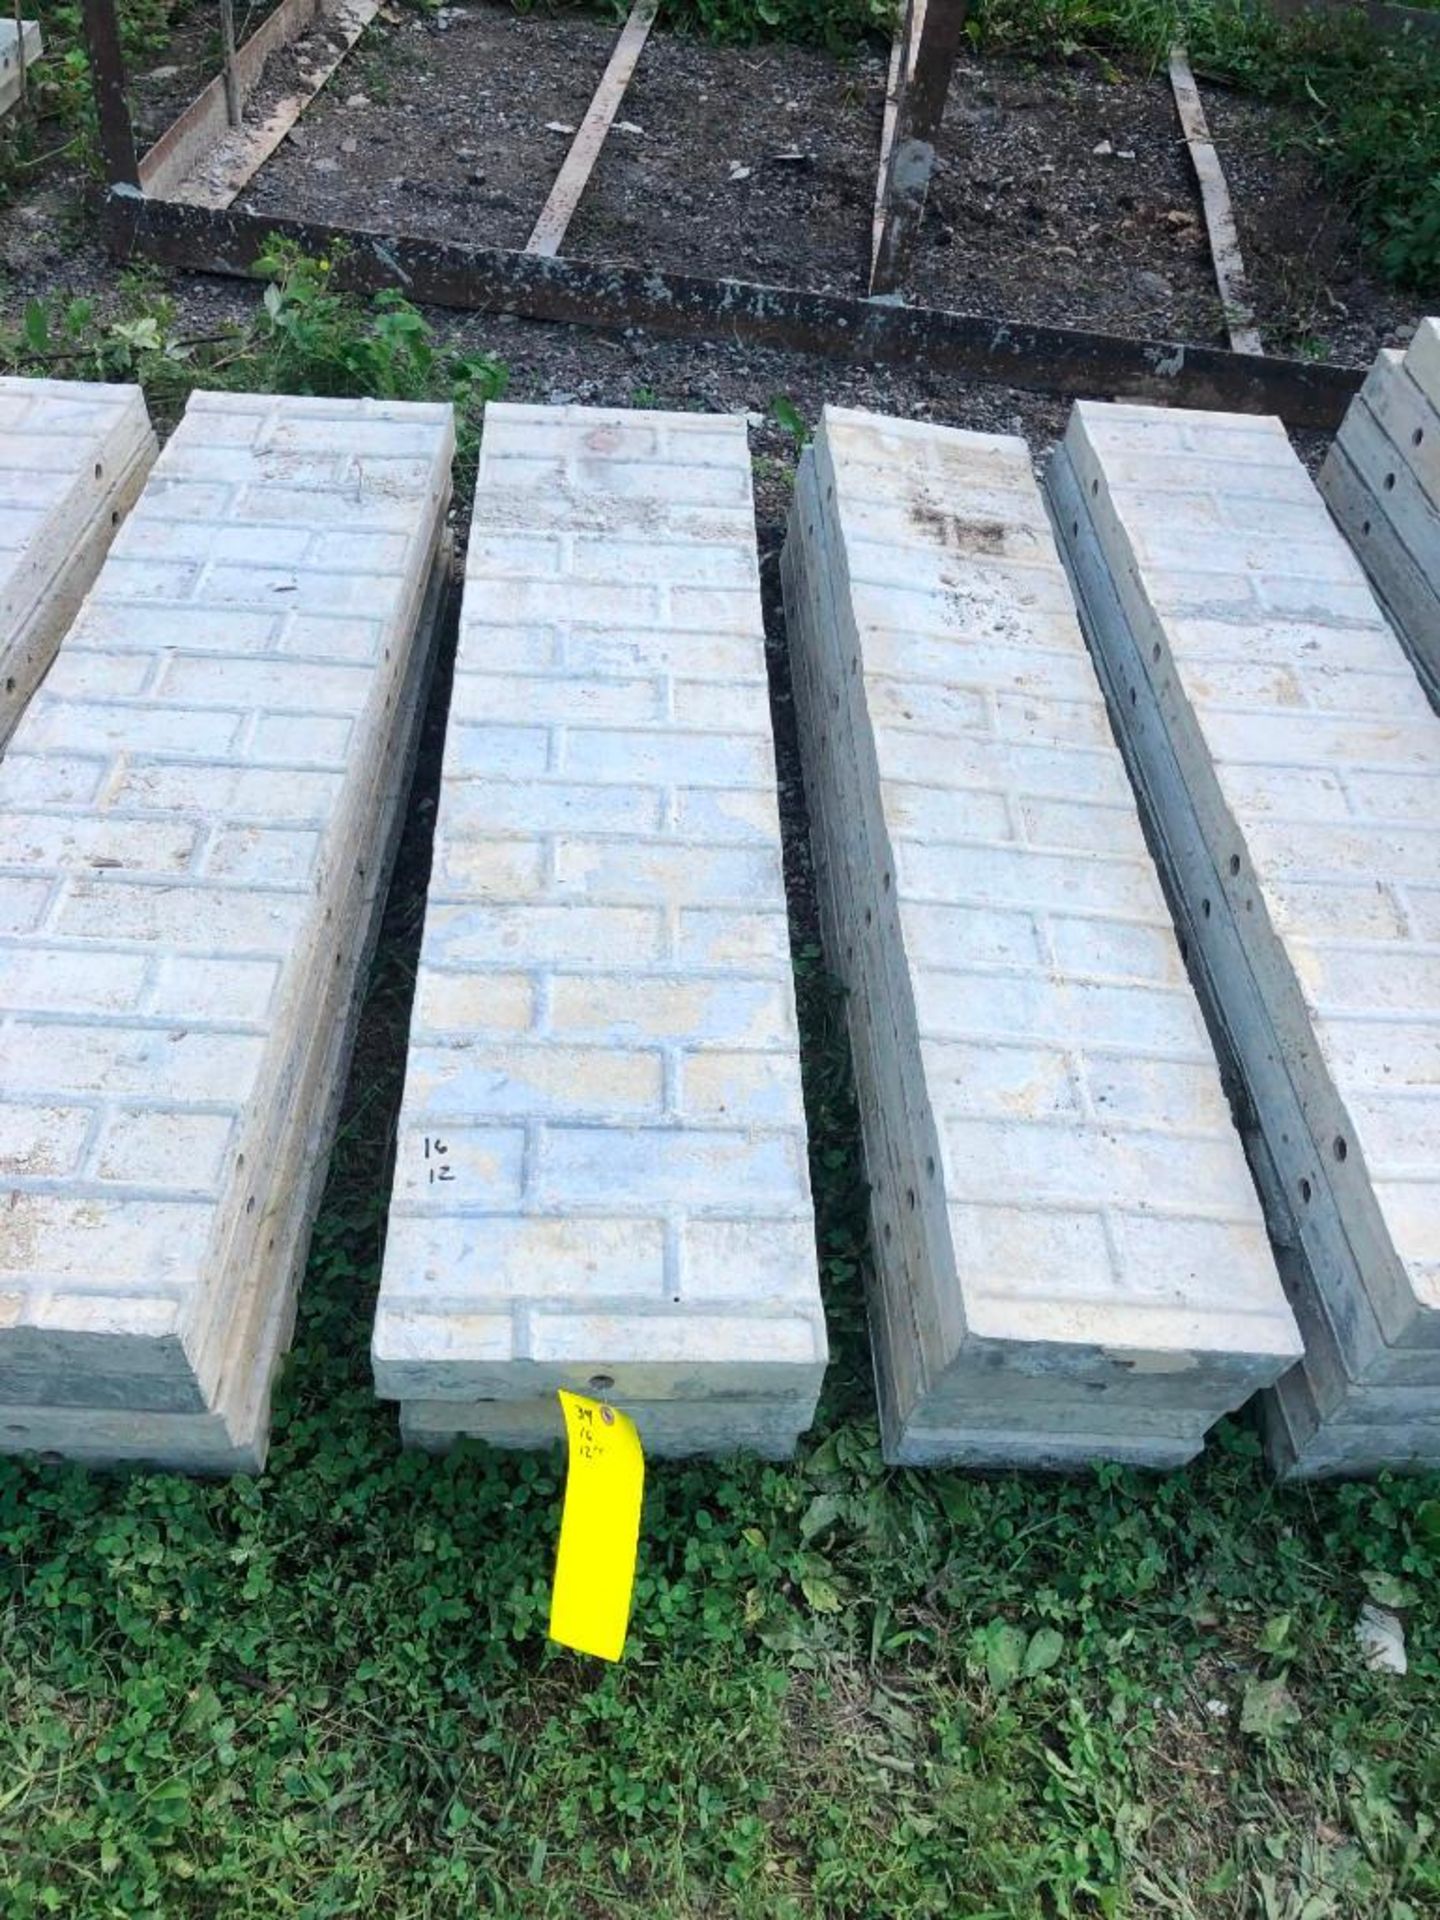 (16) 12" x 4' Symons Aluminum Concrete Forms, Smooth Brick 6-12 Hole Pattern. Located at 2086 E US